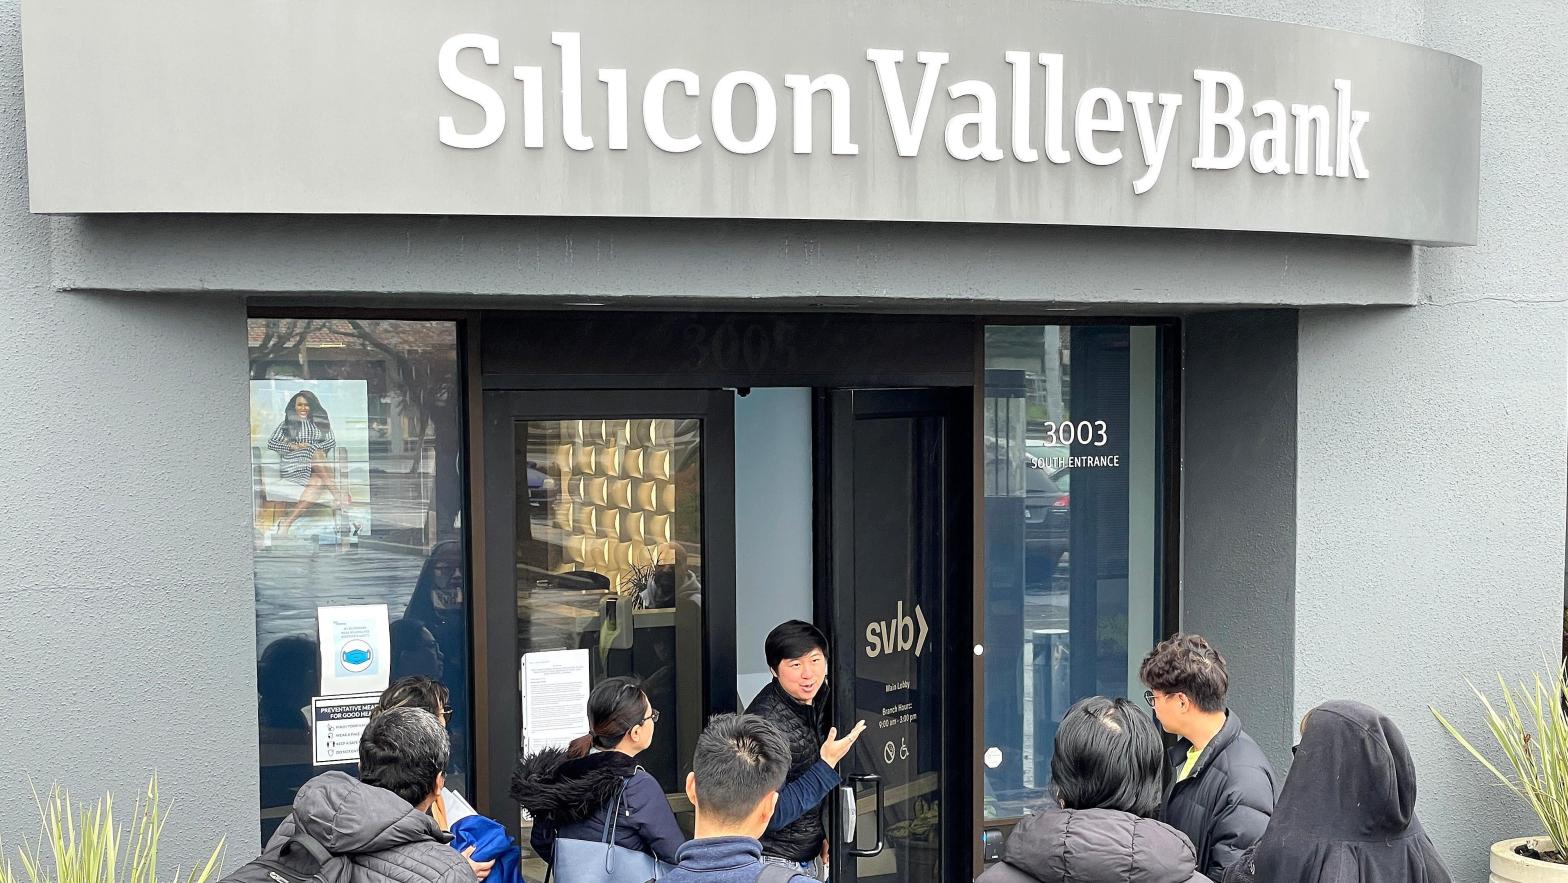 Silicon Valley Bank headquarters in Santa Clara, California closed on March 10 amidst the bank's failure.  (Image: Justin Sullivan, Getty Images)